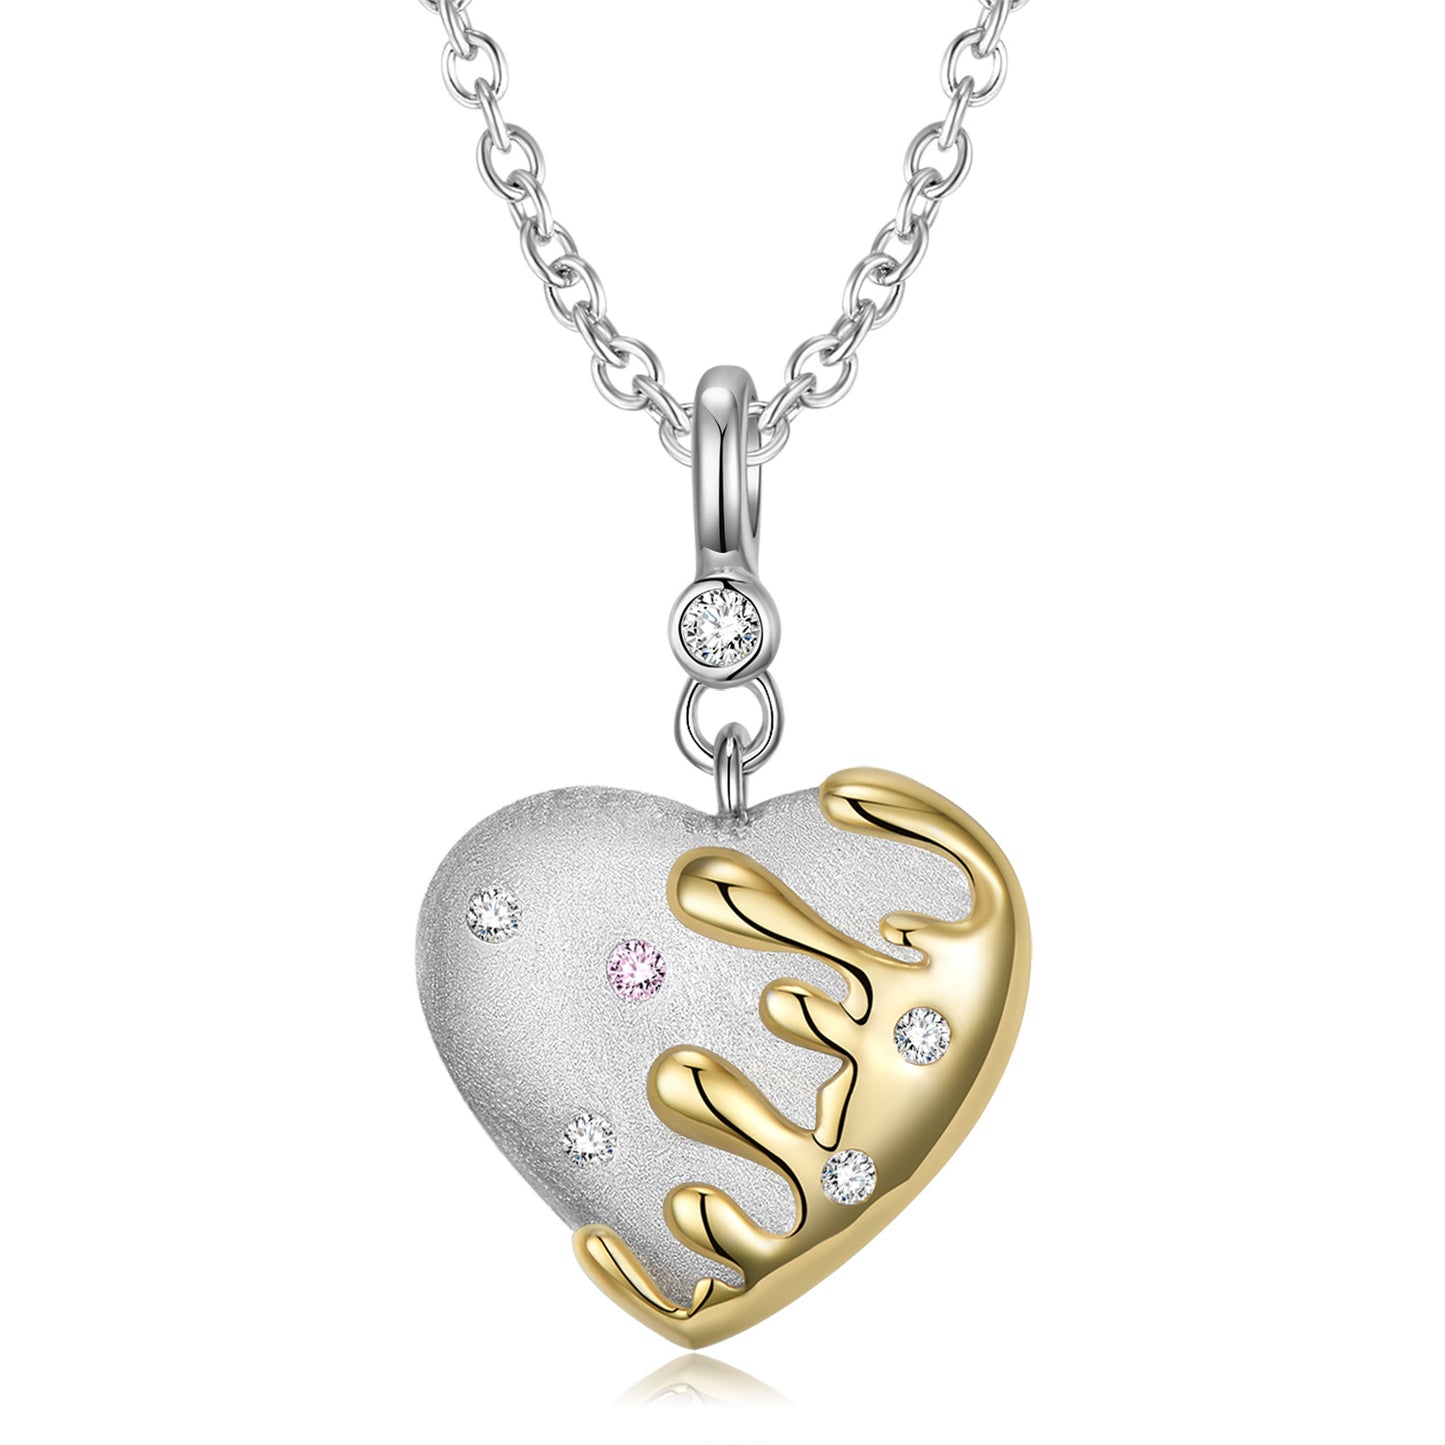 FairyLocus "Everlasting Love" Christmas Heart Cut Sterling Silver Necklace Jewelry Gift FLCYNL07 FairyLocus